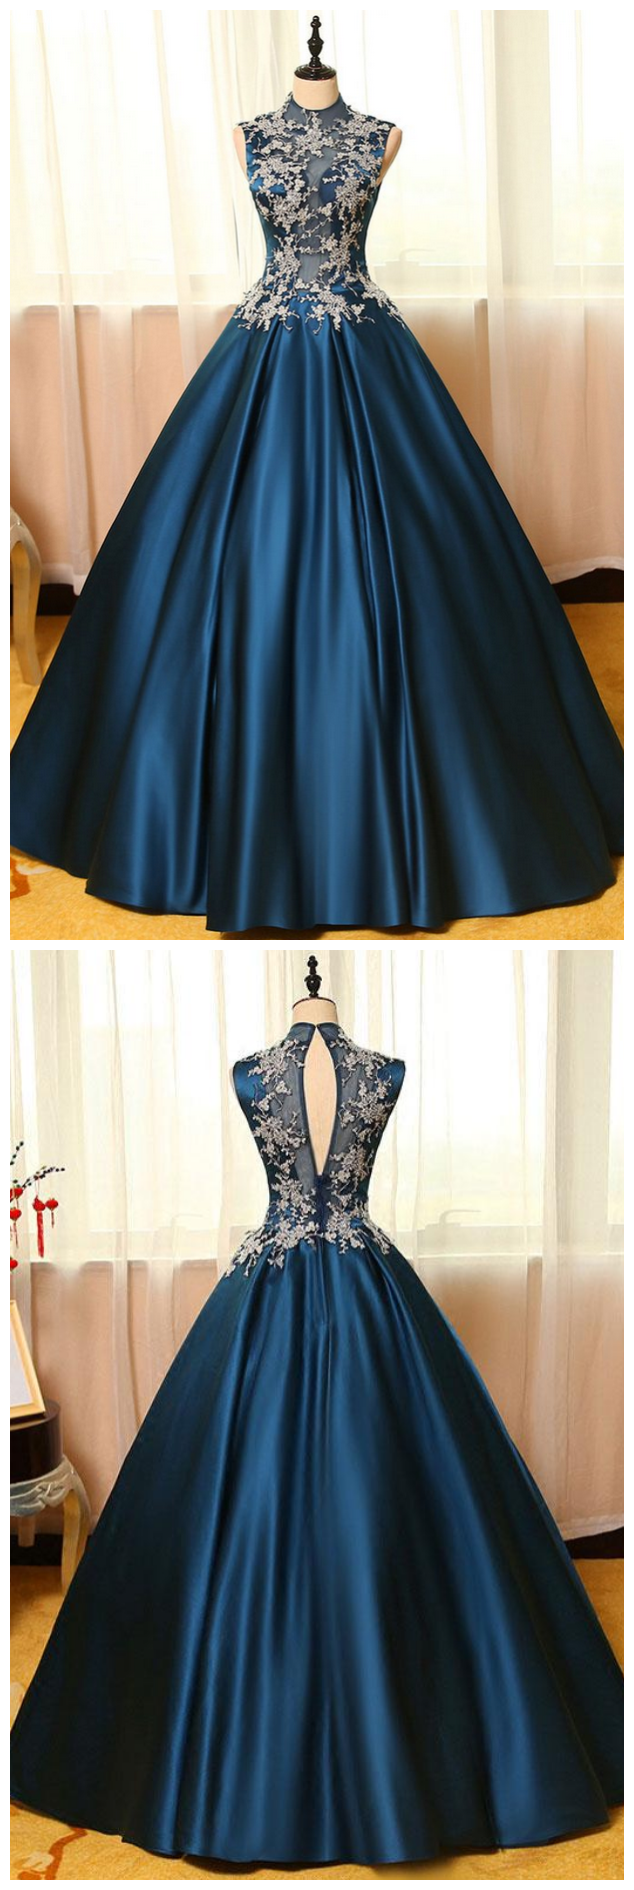 A-line Satin With Lace Long Prom Dress